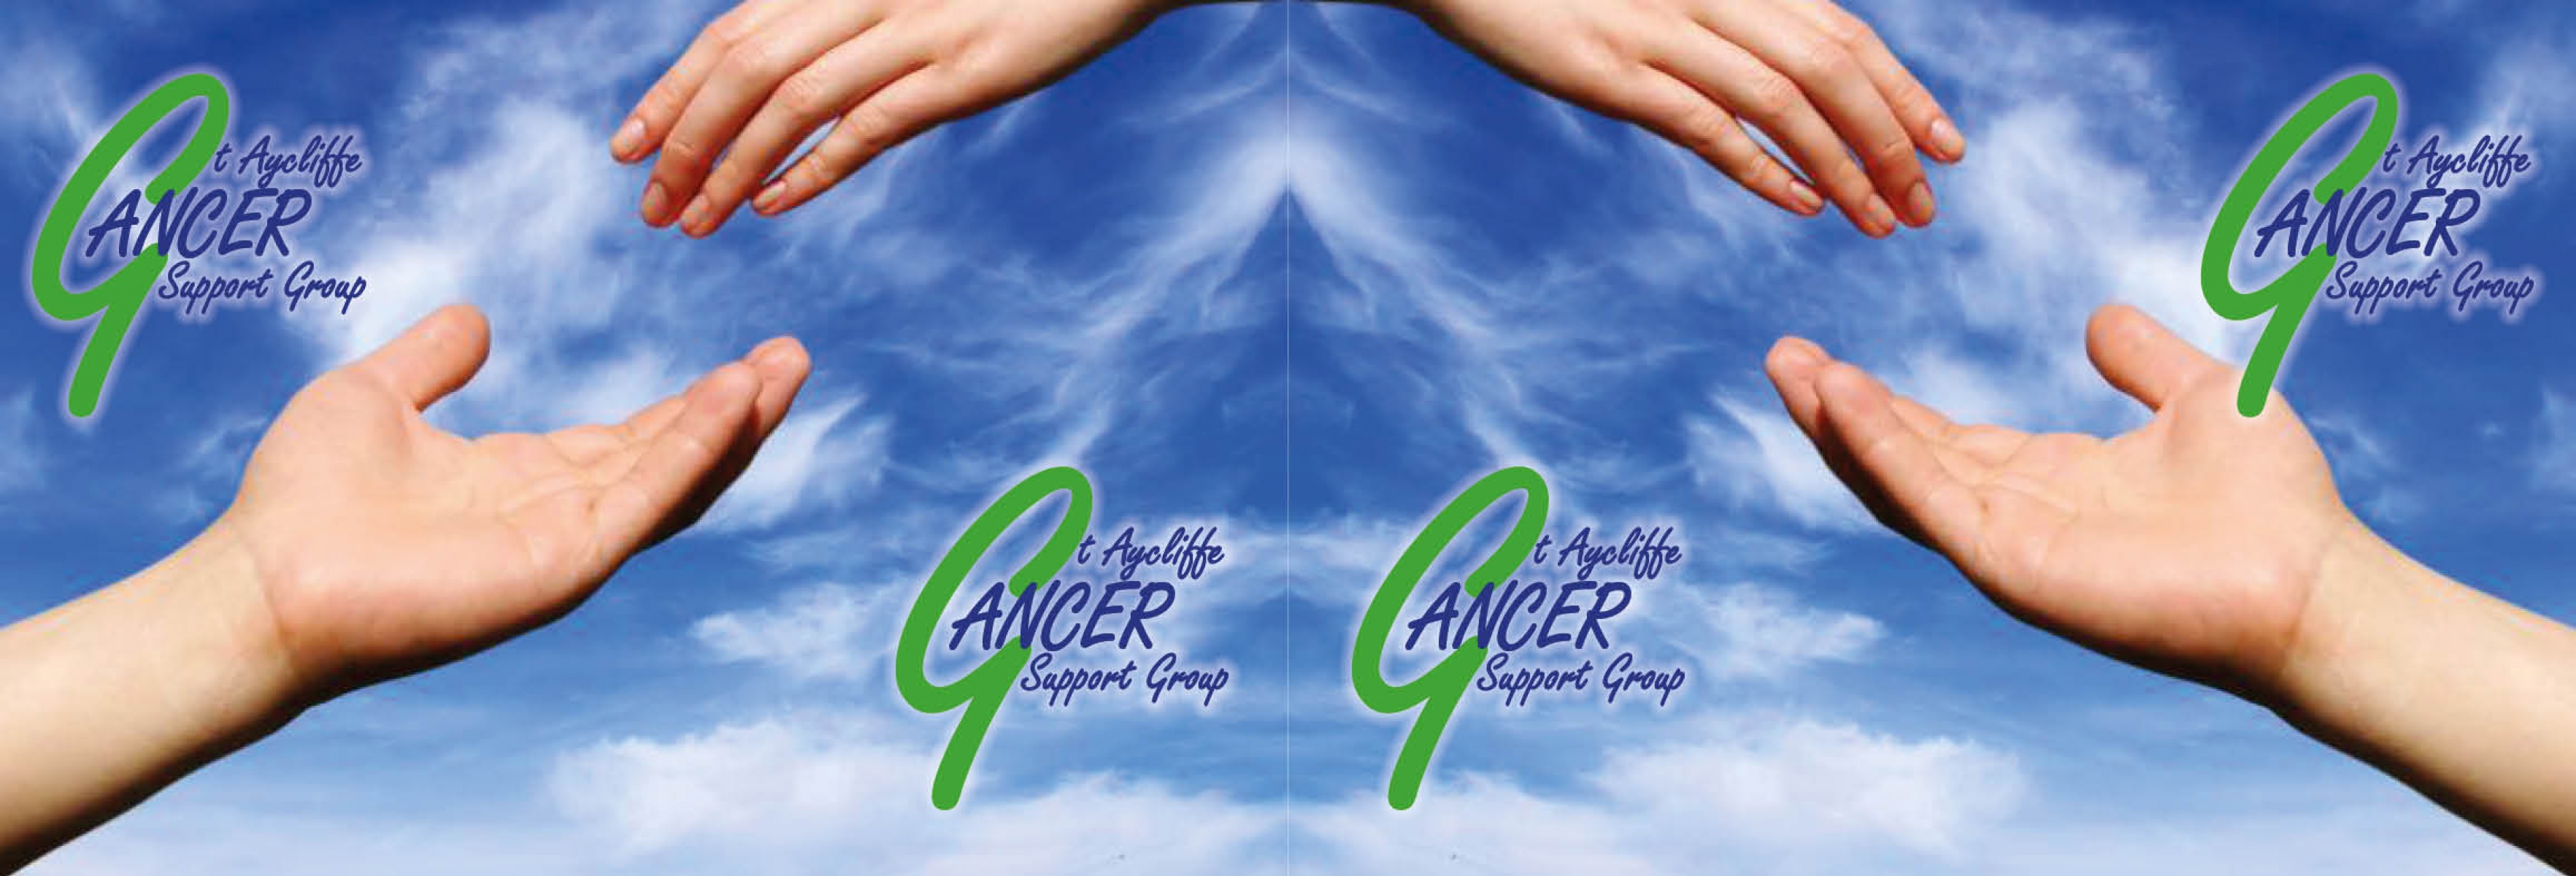 Great Aycliffe Cancer Support group eCards